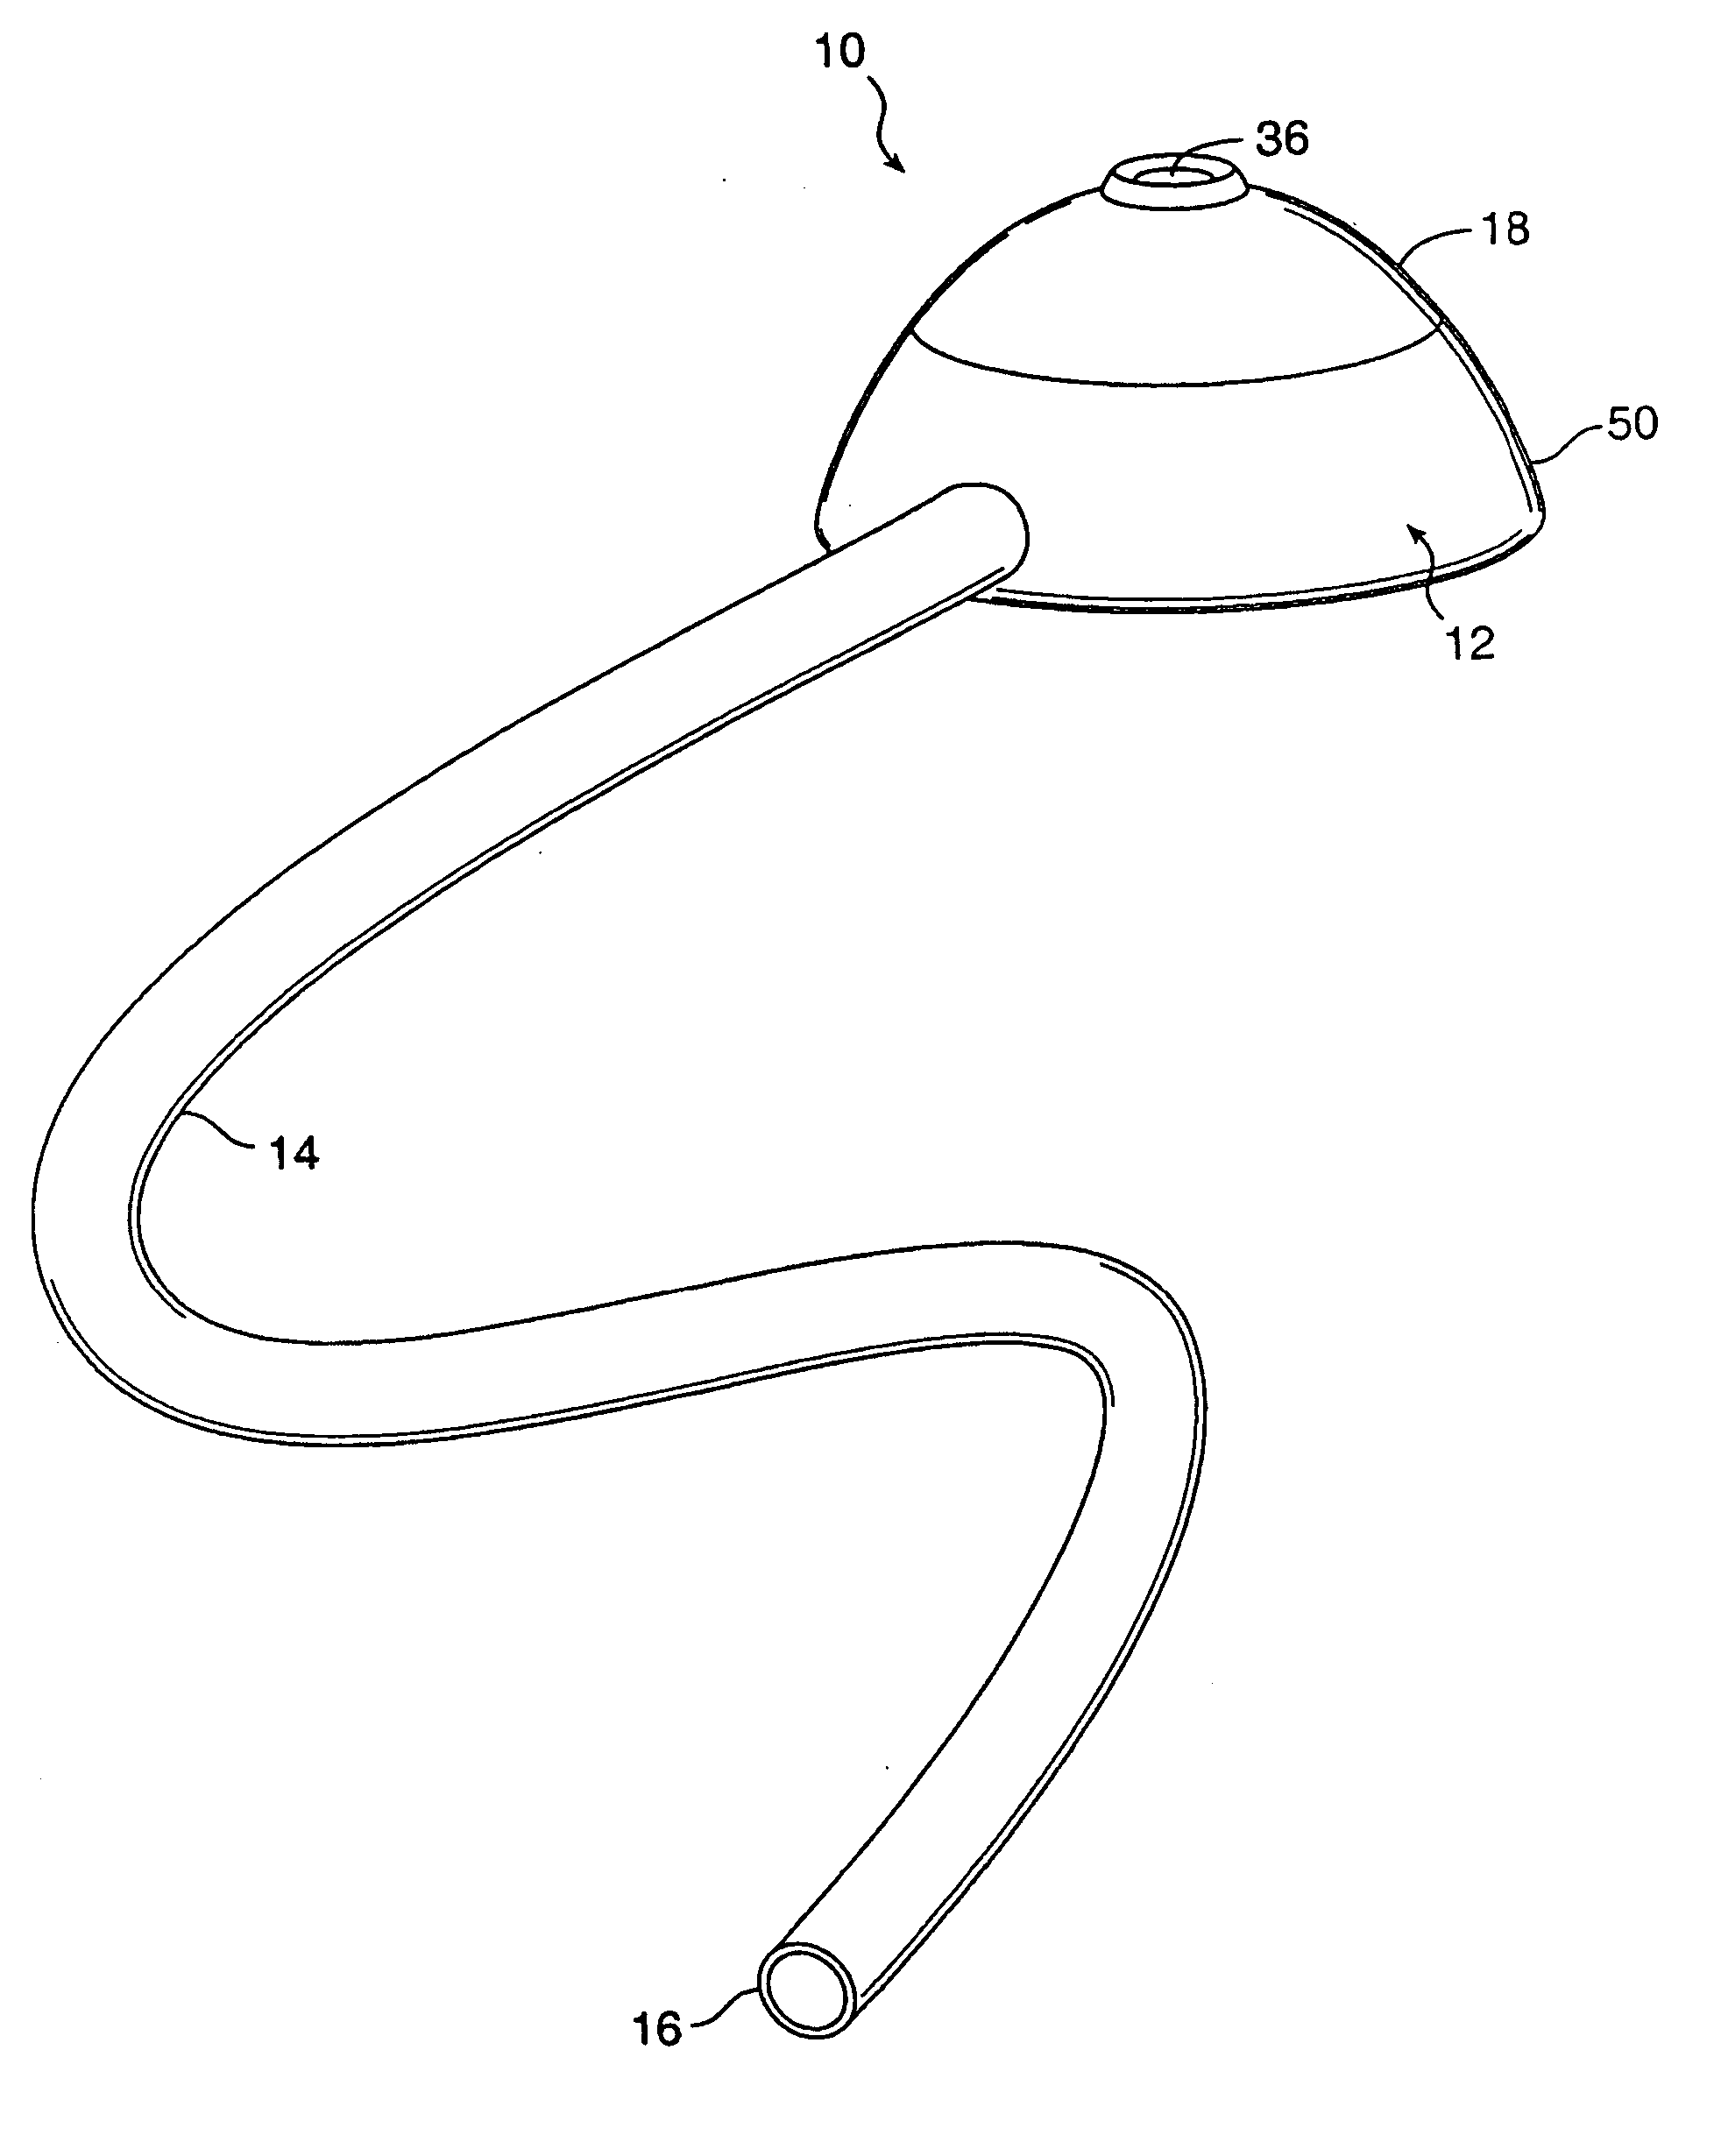 Valve port and method for vascular access